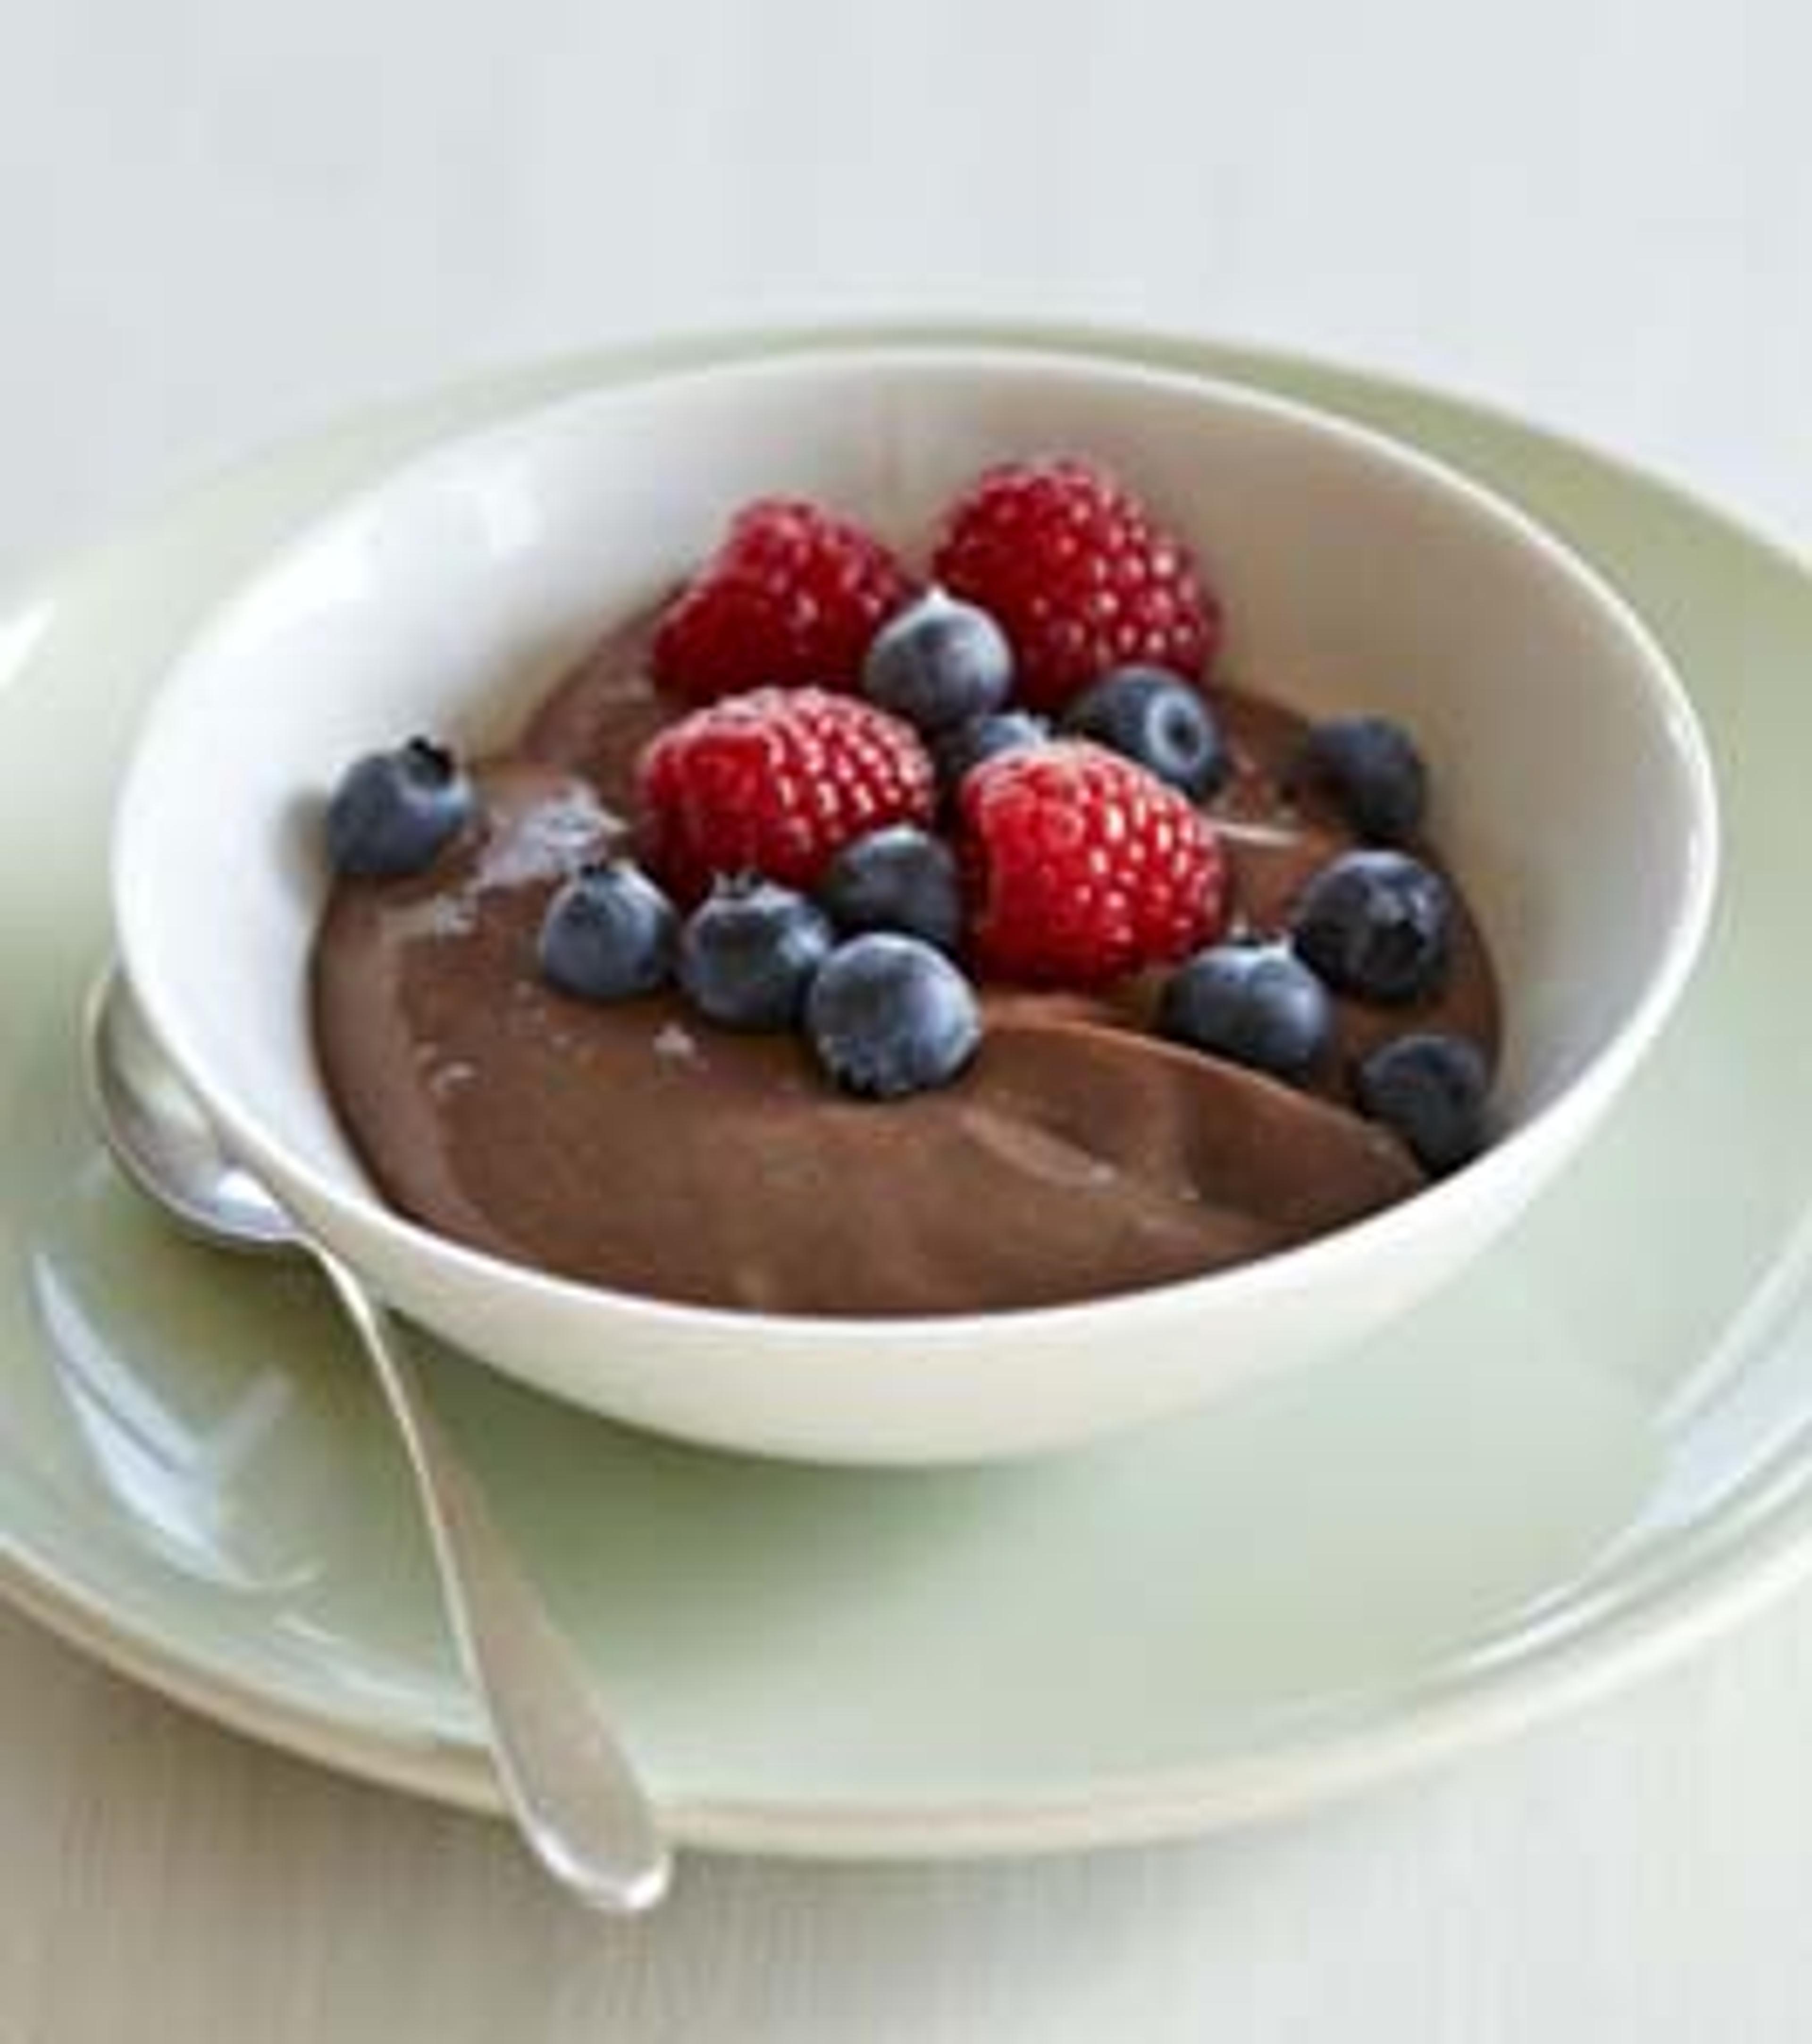 Decadent Chocolate Mousse with Berries